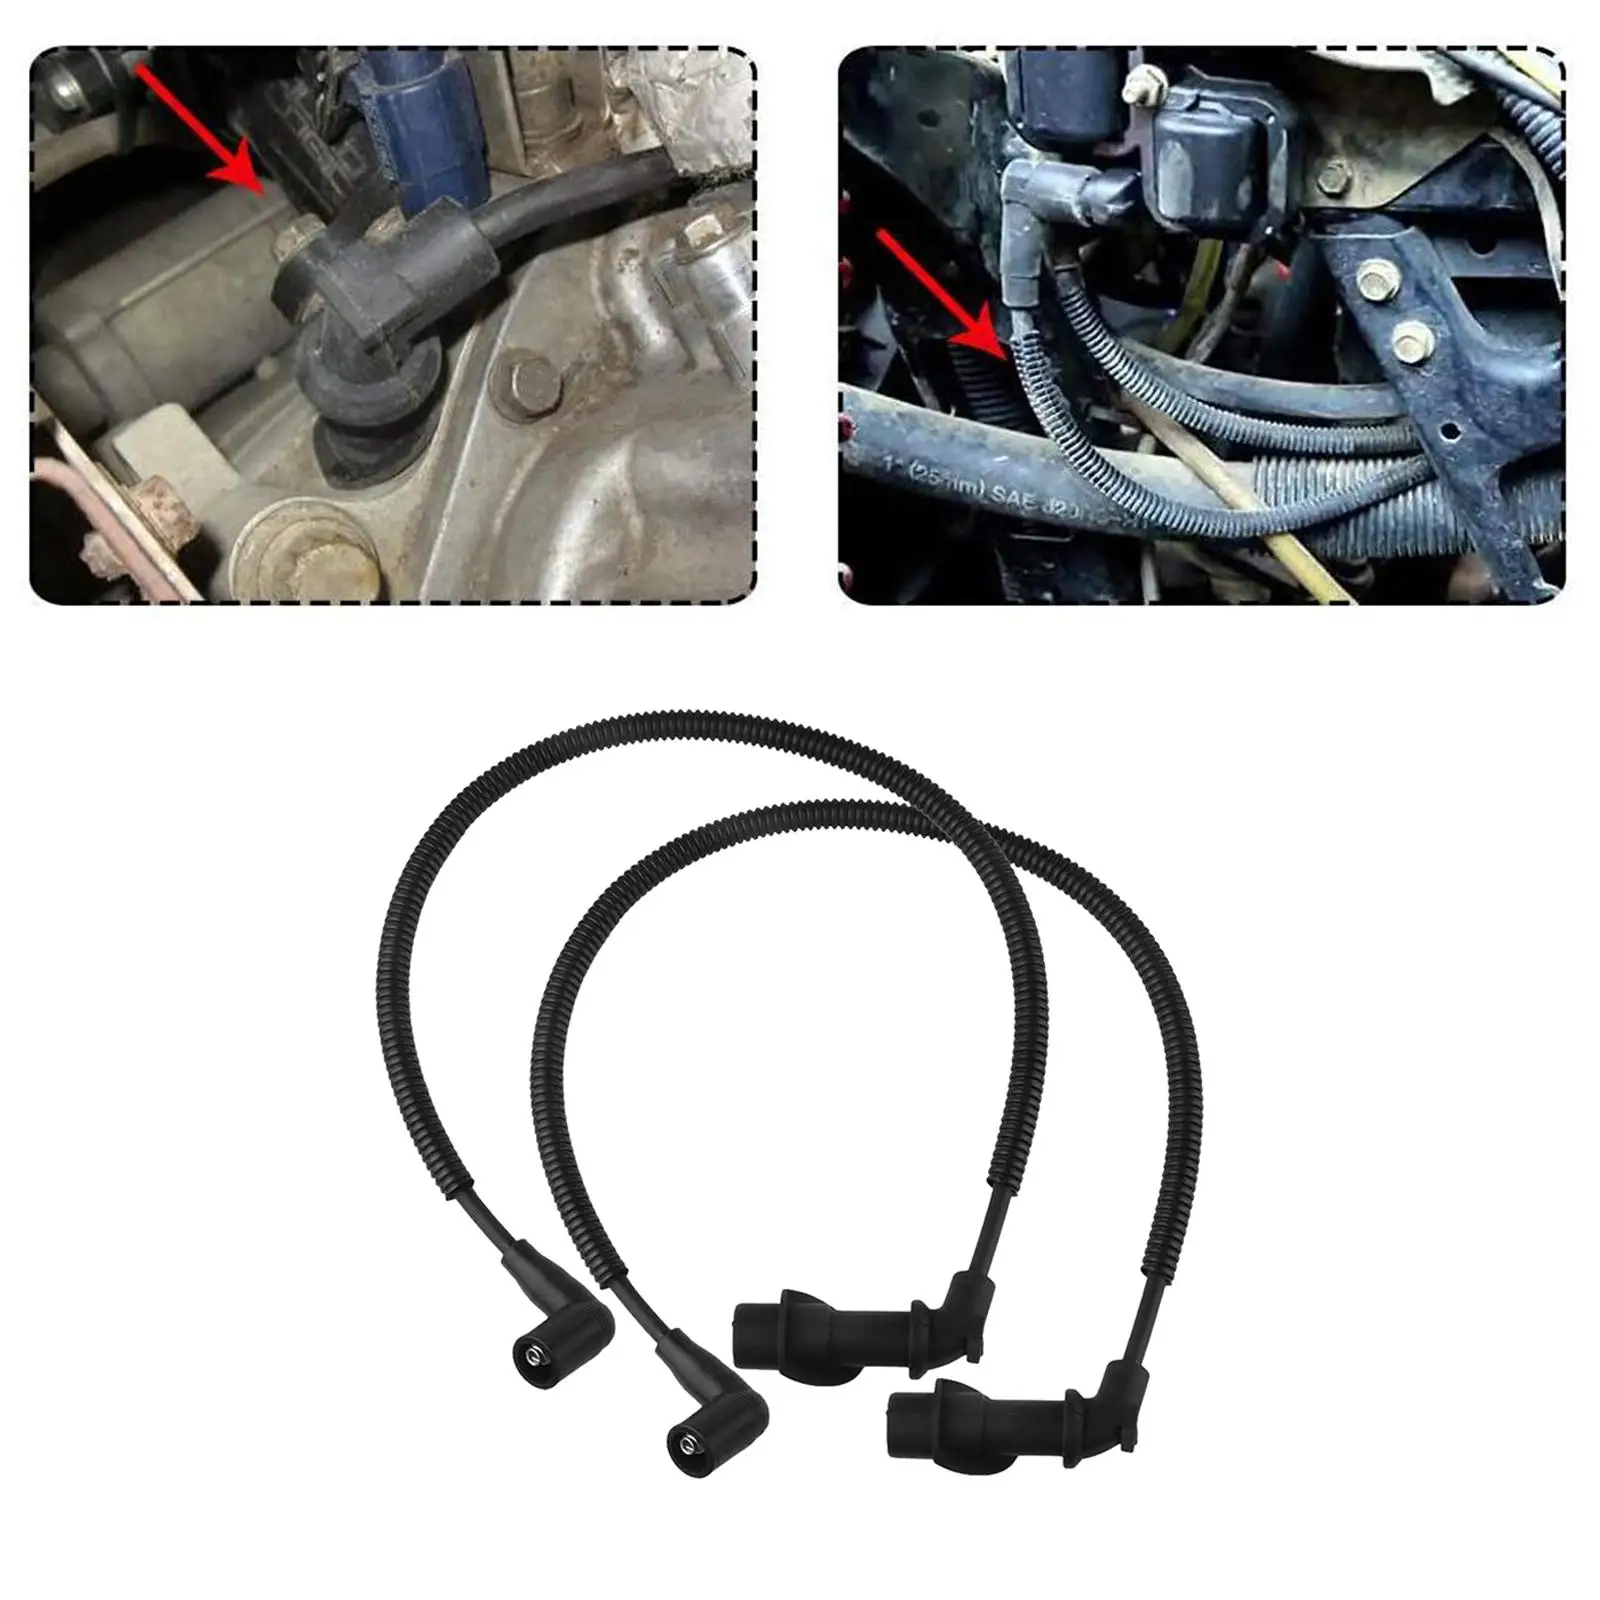 1 pair of spark plug ignition coil wires for  S 800 2009-2010, safe